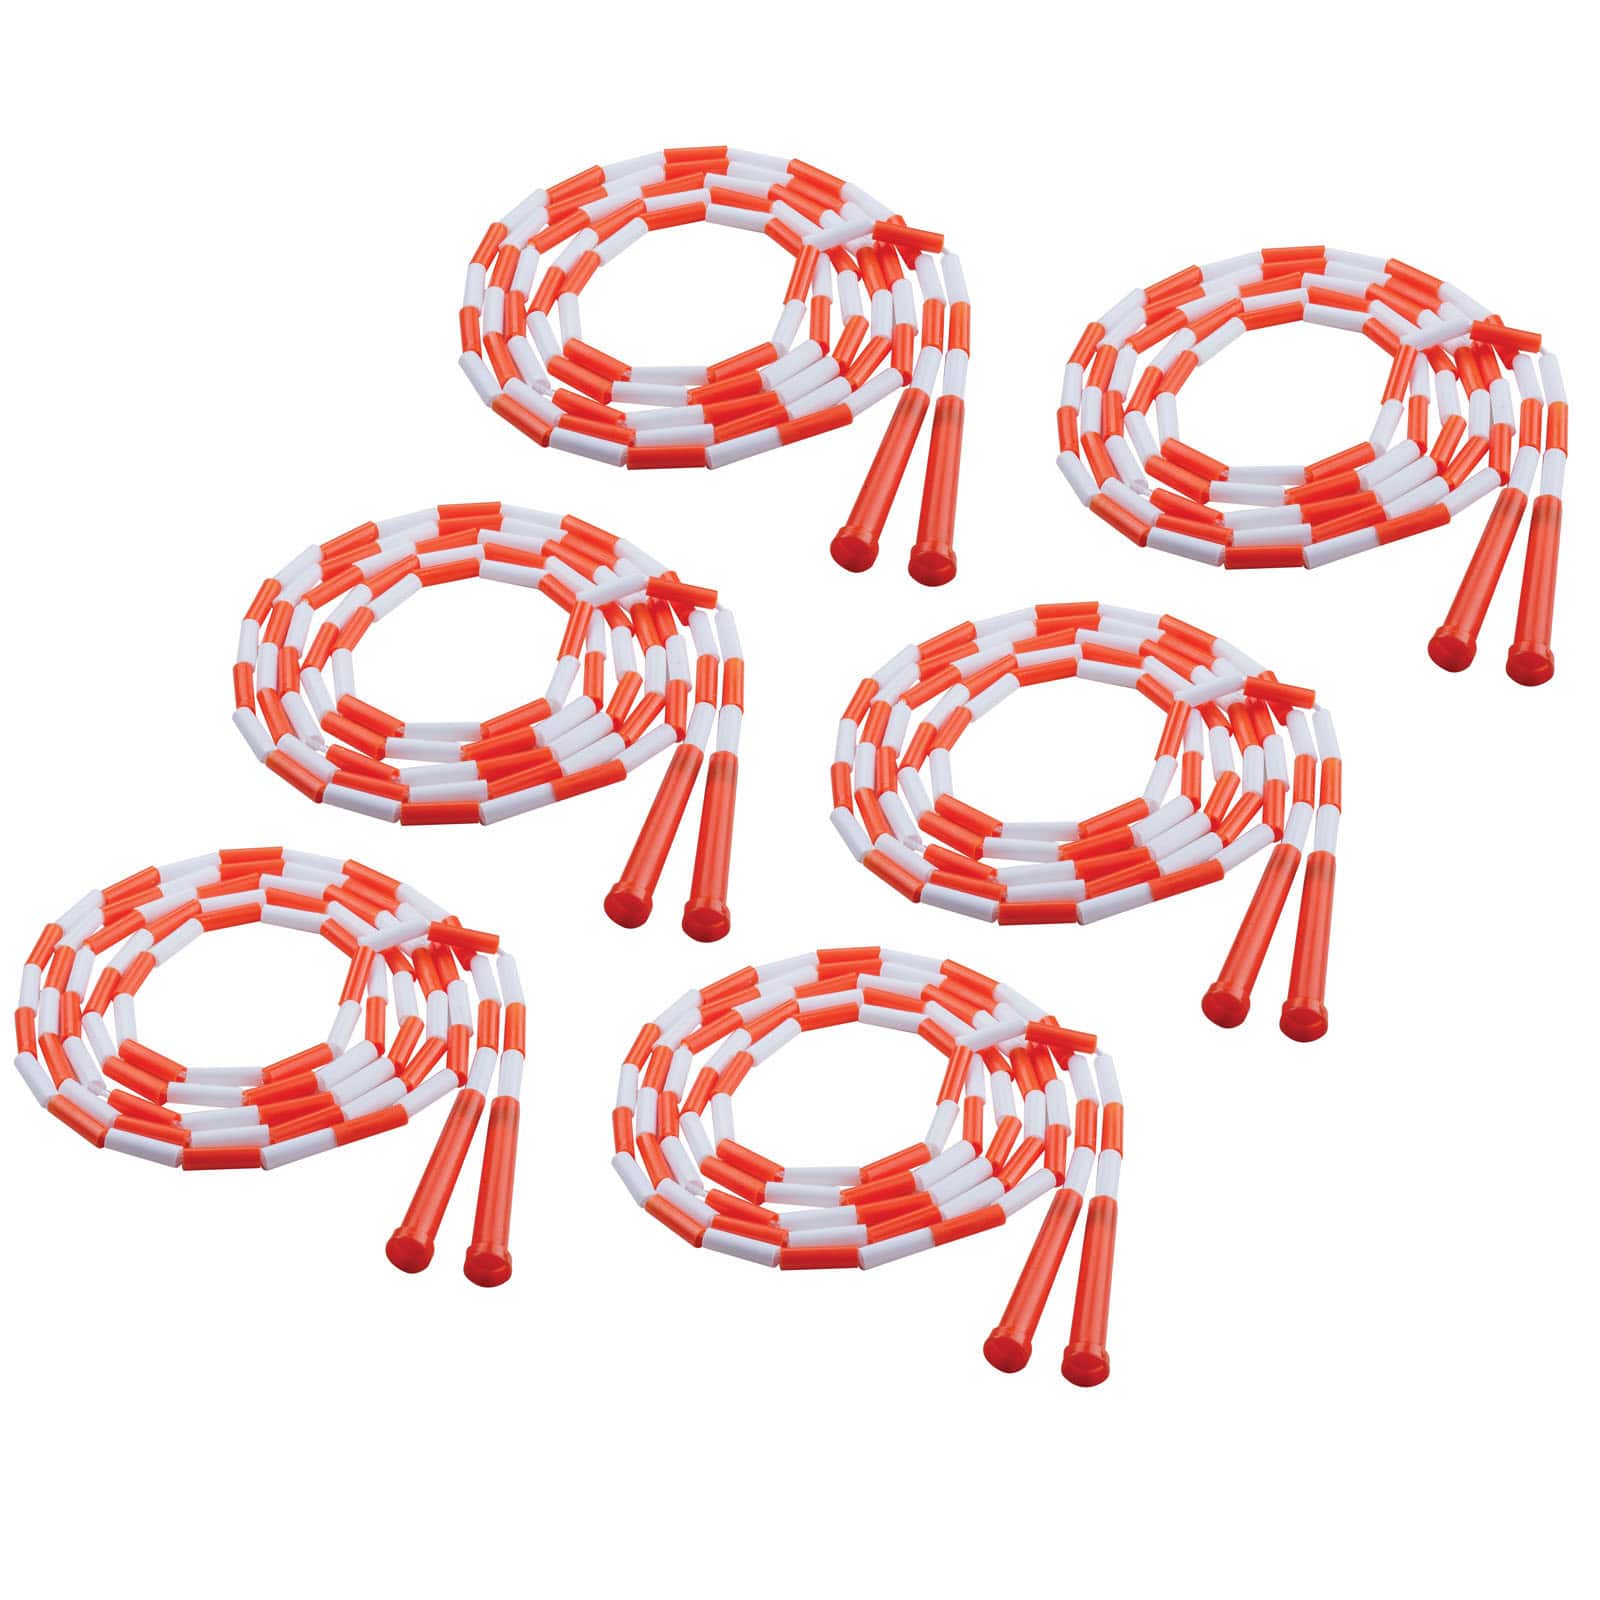 Champion Sports 10ft. Plastic Segmented Jump Rope, Pack of 6